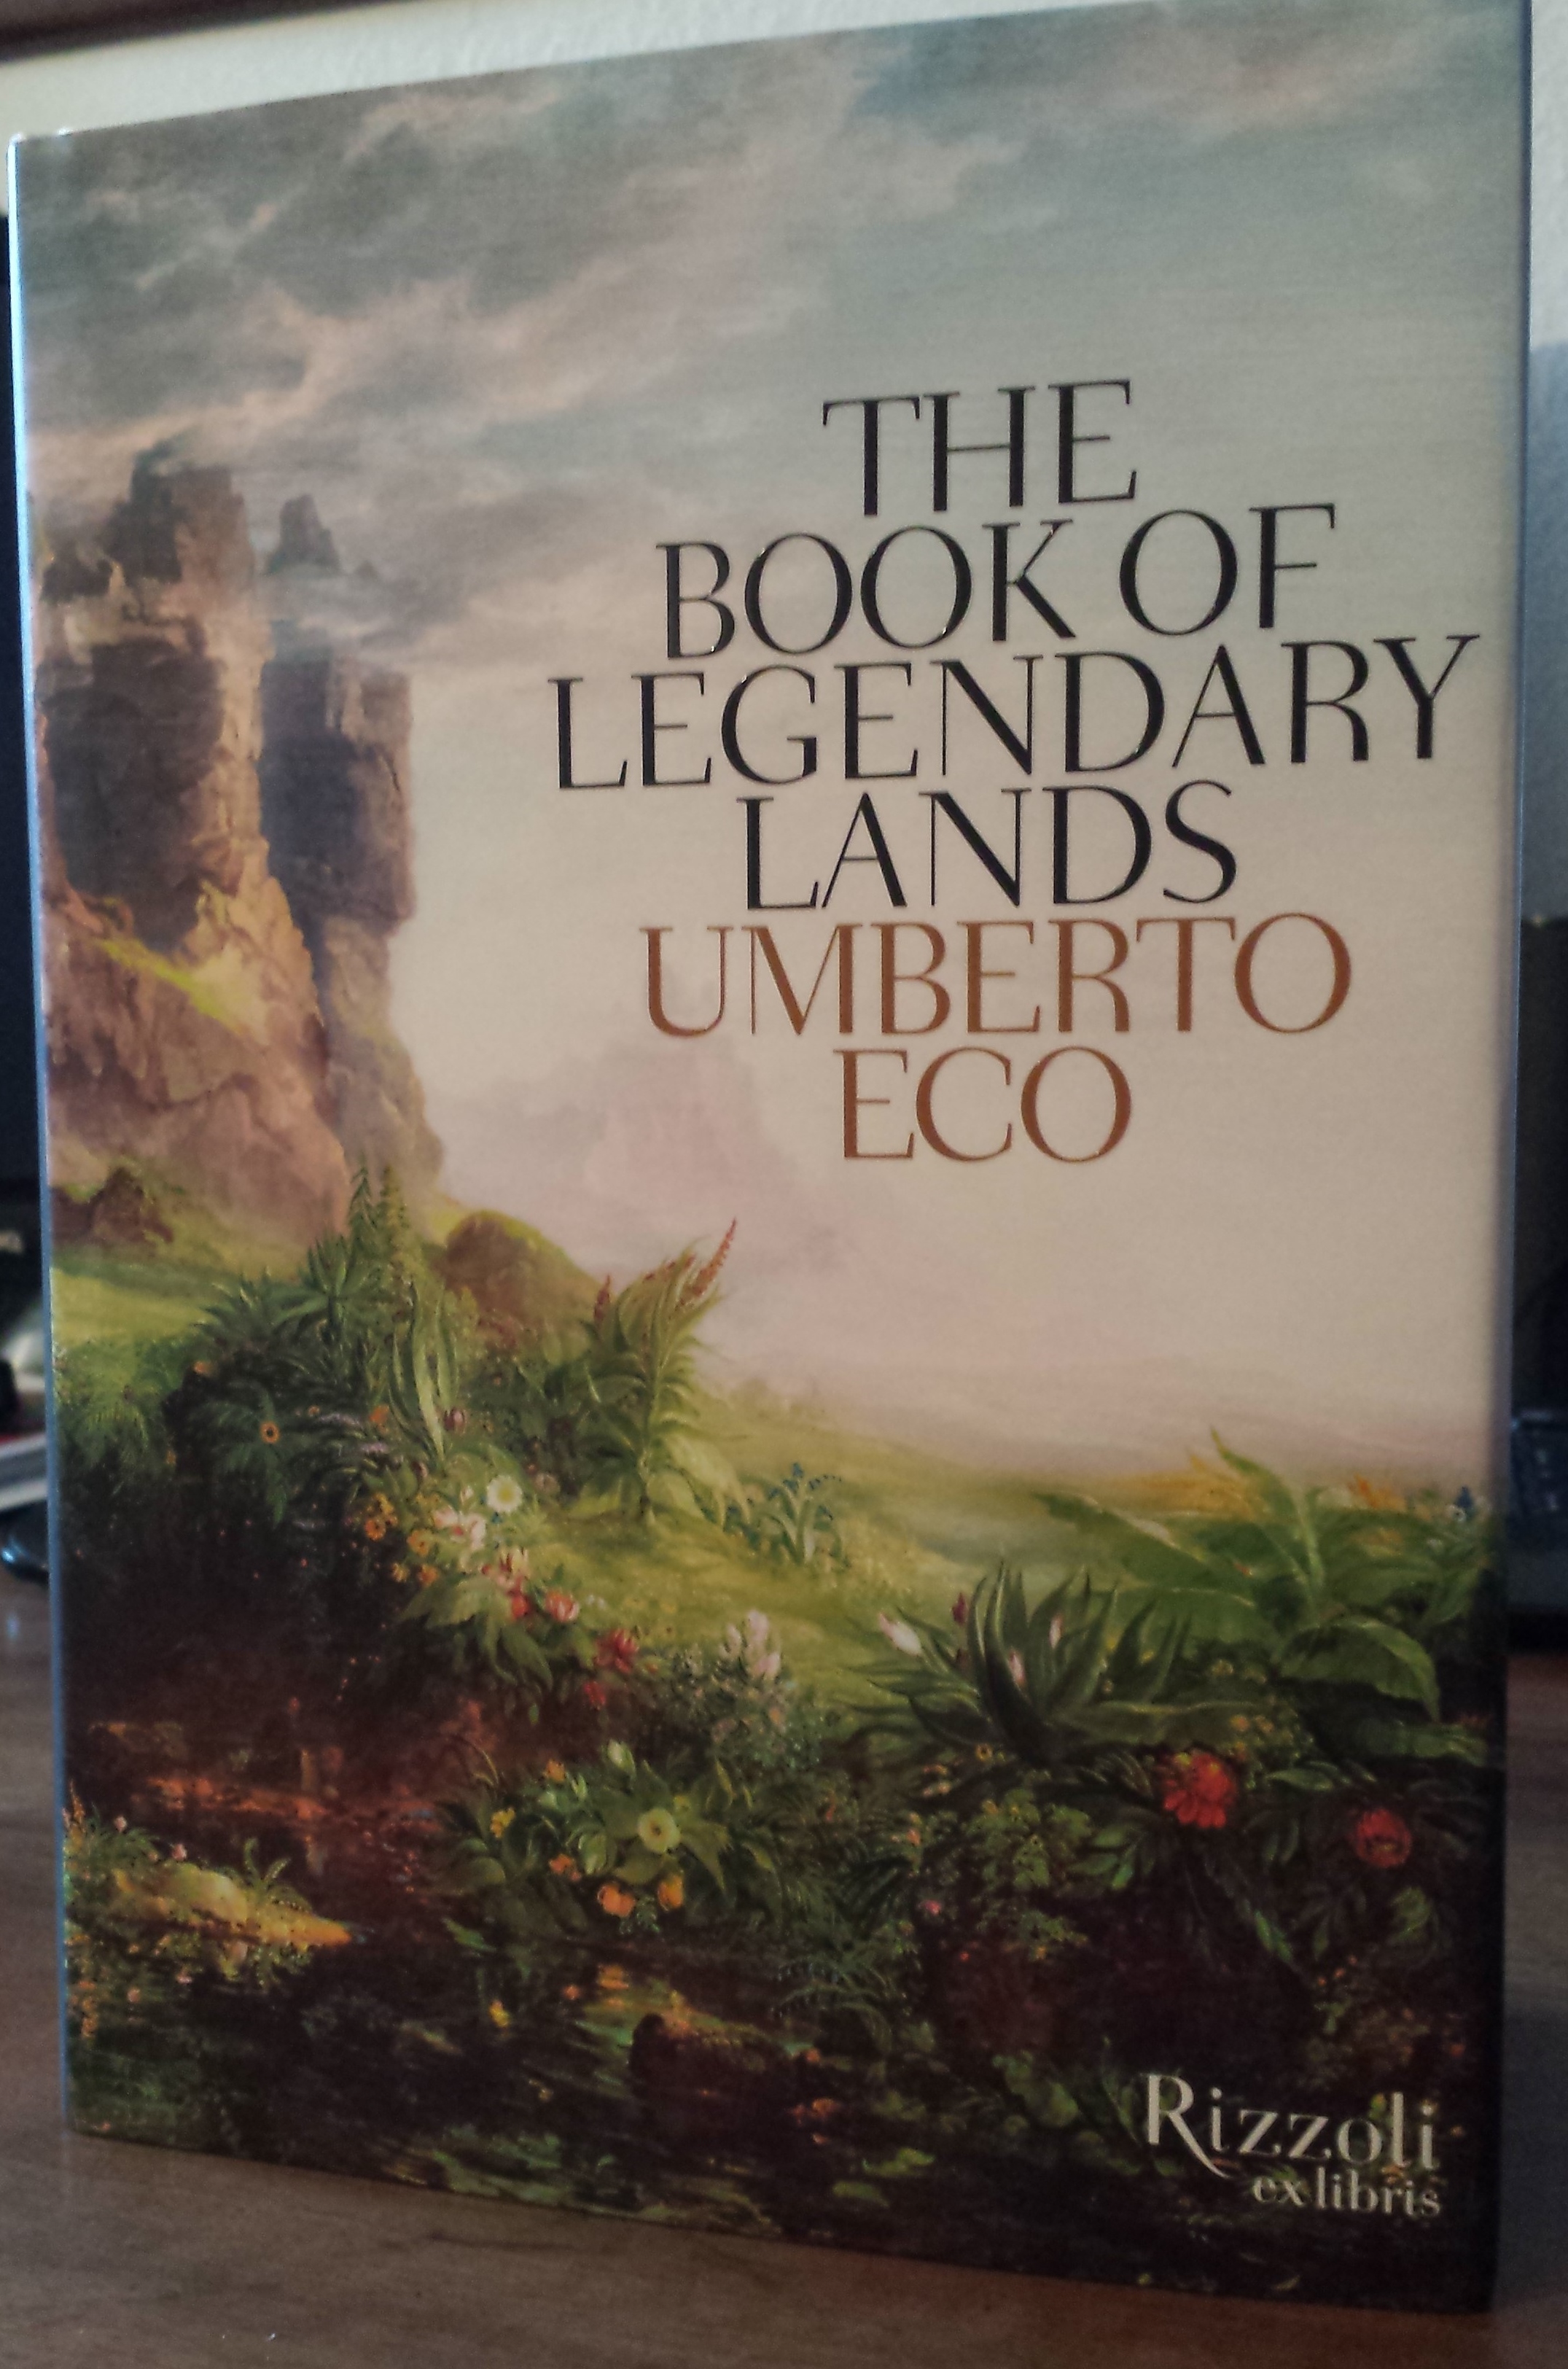 Umberto eco library essay in tamil